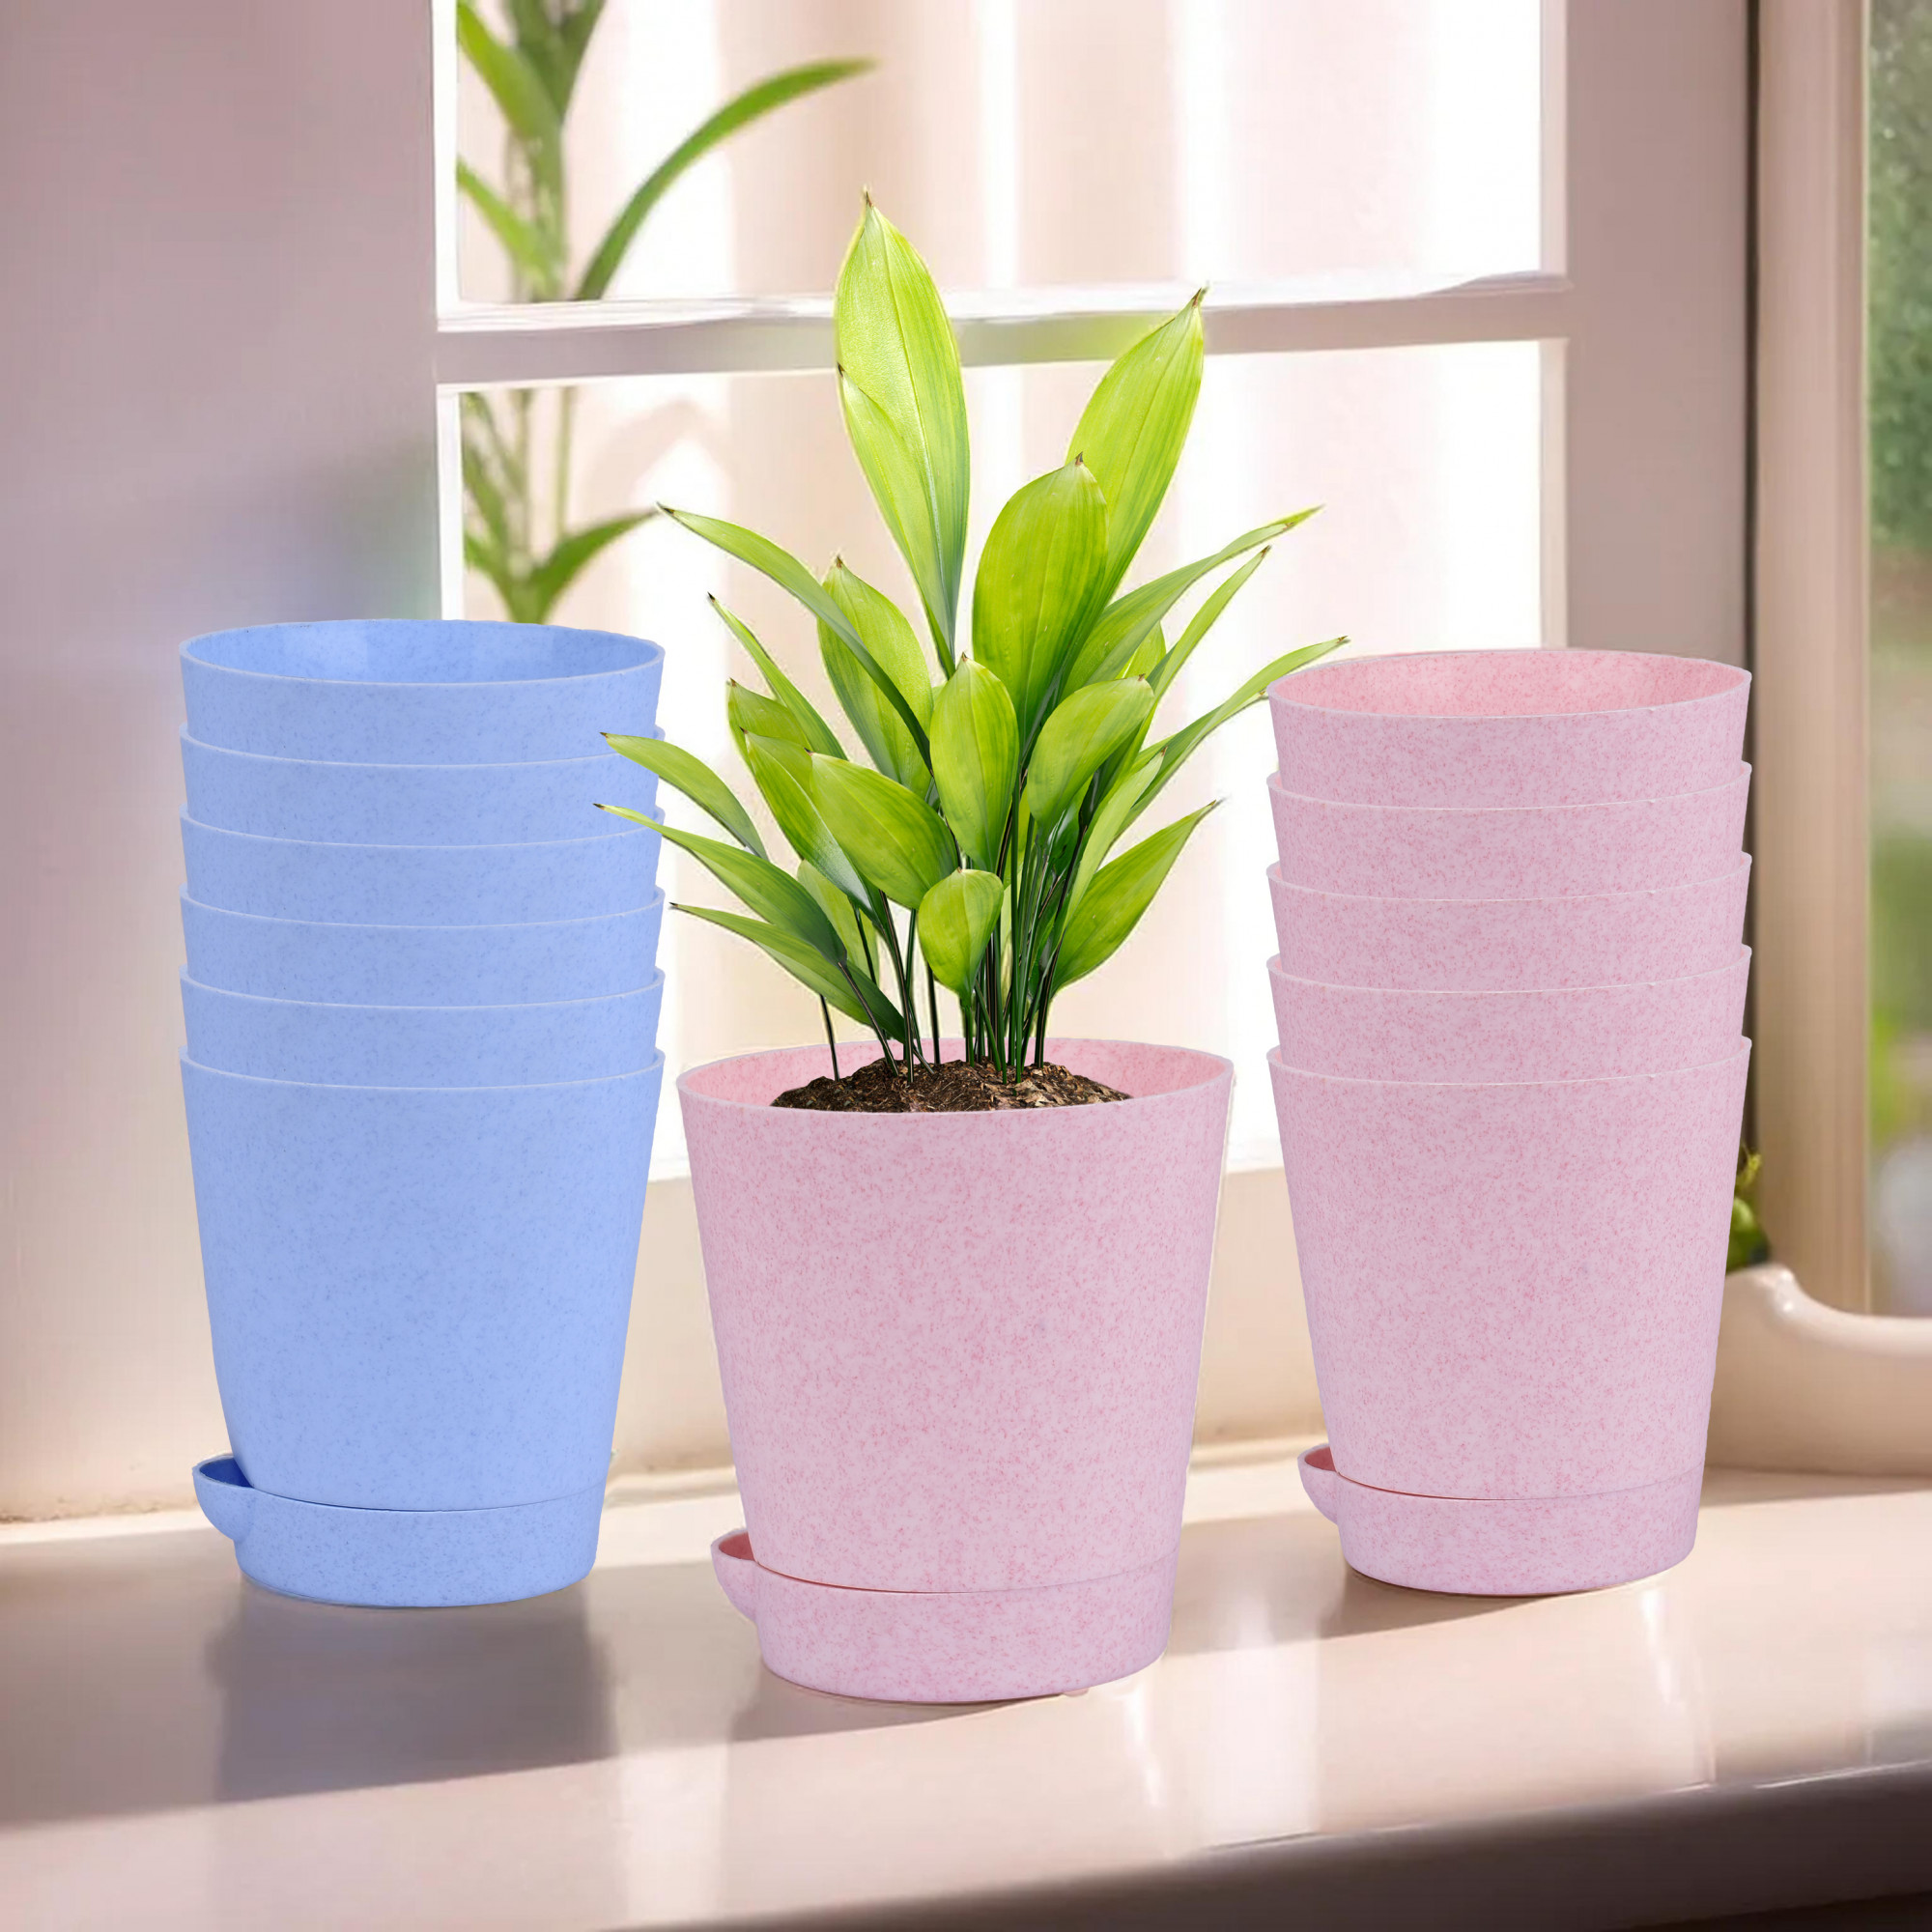 Kuber Industries Flower Pot | Flower Pot for Living Room-Office | Planters for Home-office-Lawns & Garden Décor | Self Watering Flower Planters Pots | Marble Titan | 4 Inch | Blue & Pink